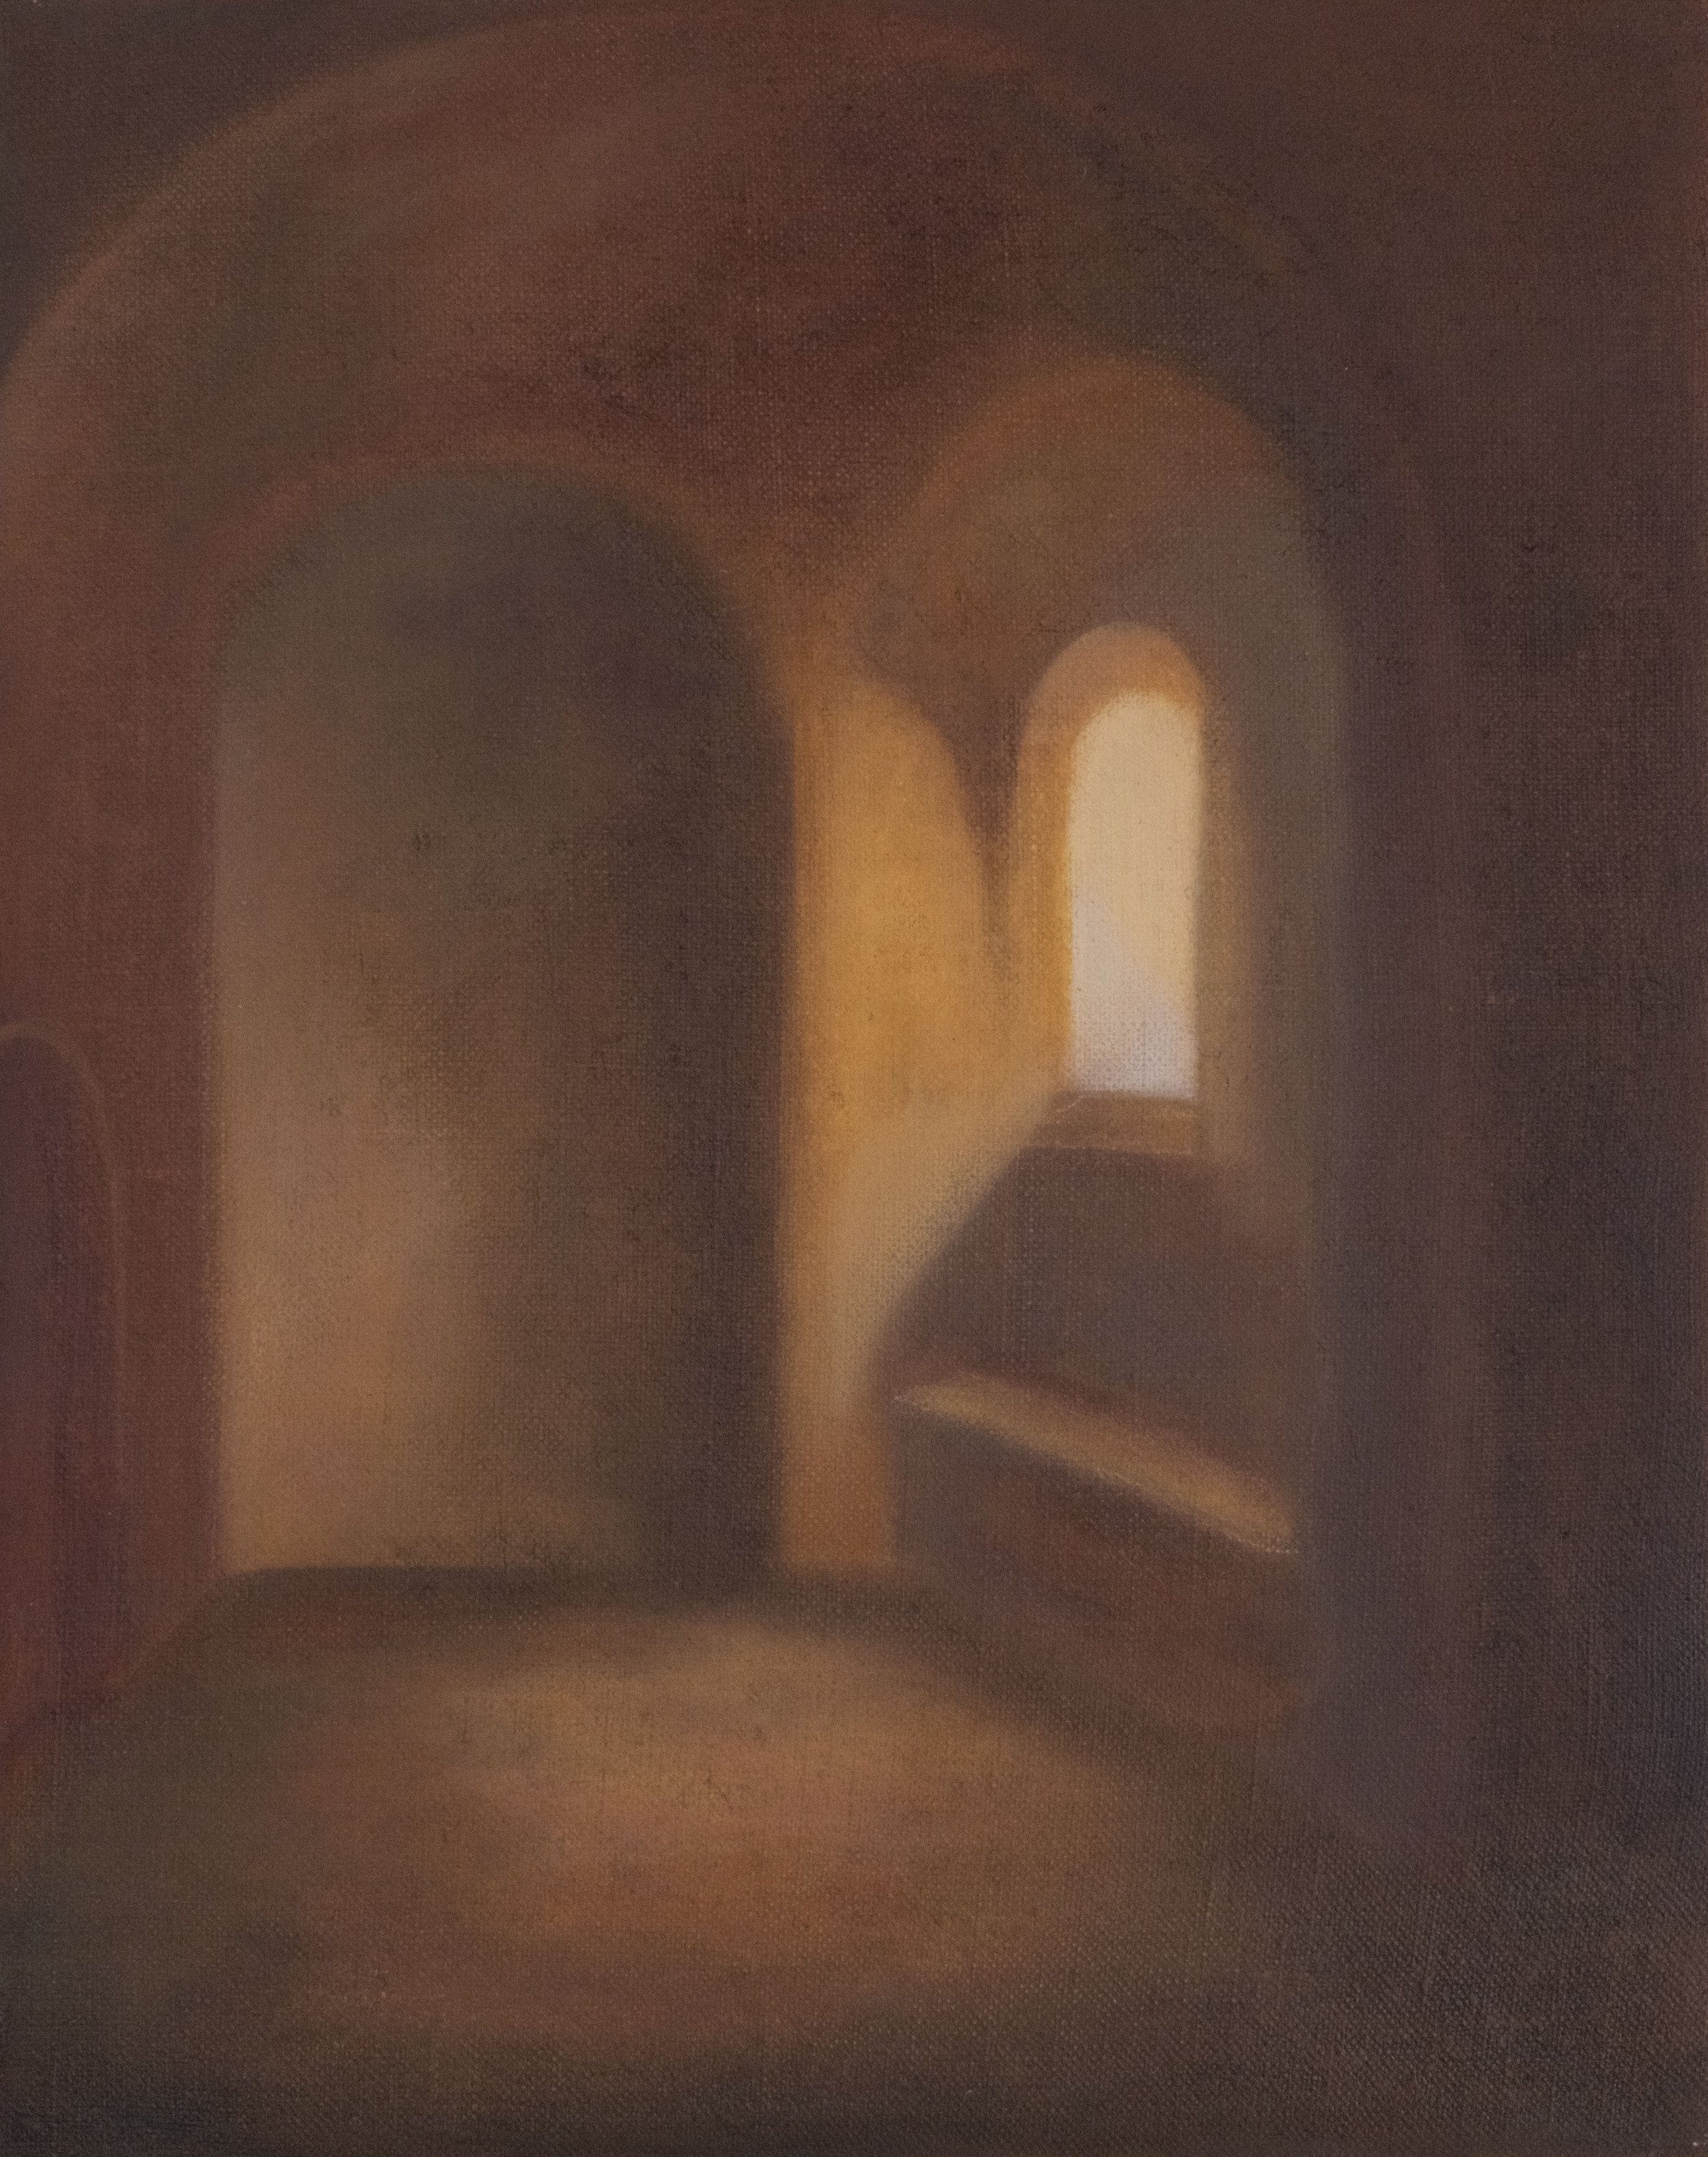  Suyi Xu,  Consulting Lights (Study of Rembrandt/removing the figure) , 2022. Oil on linen, 14 x 11 inches ©Suyi Xu, Photograph by Xi Zhou, courtesy of Fou Gallery 